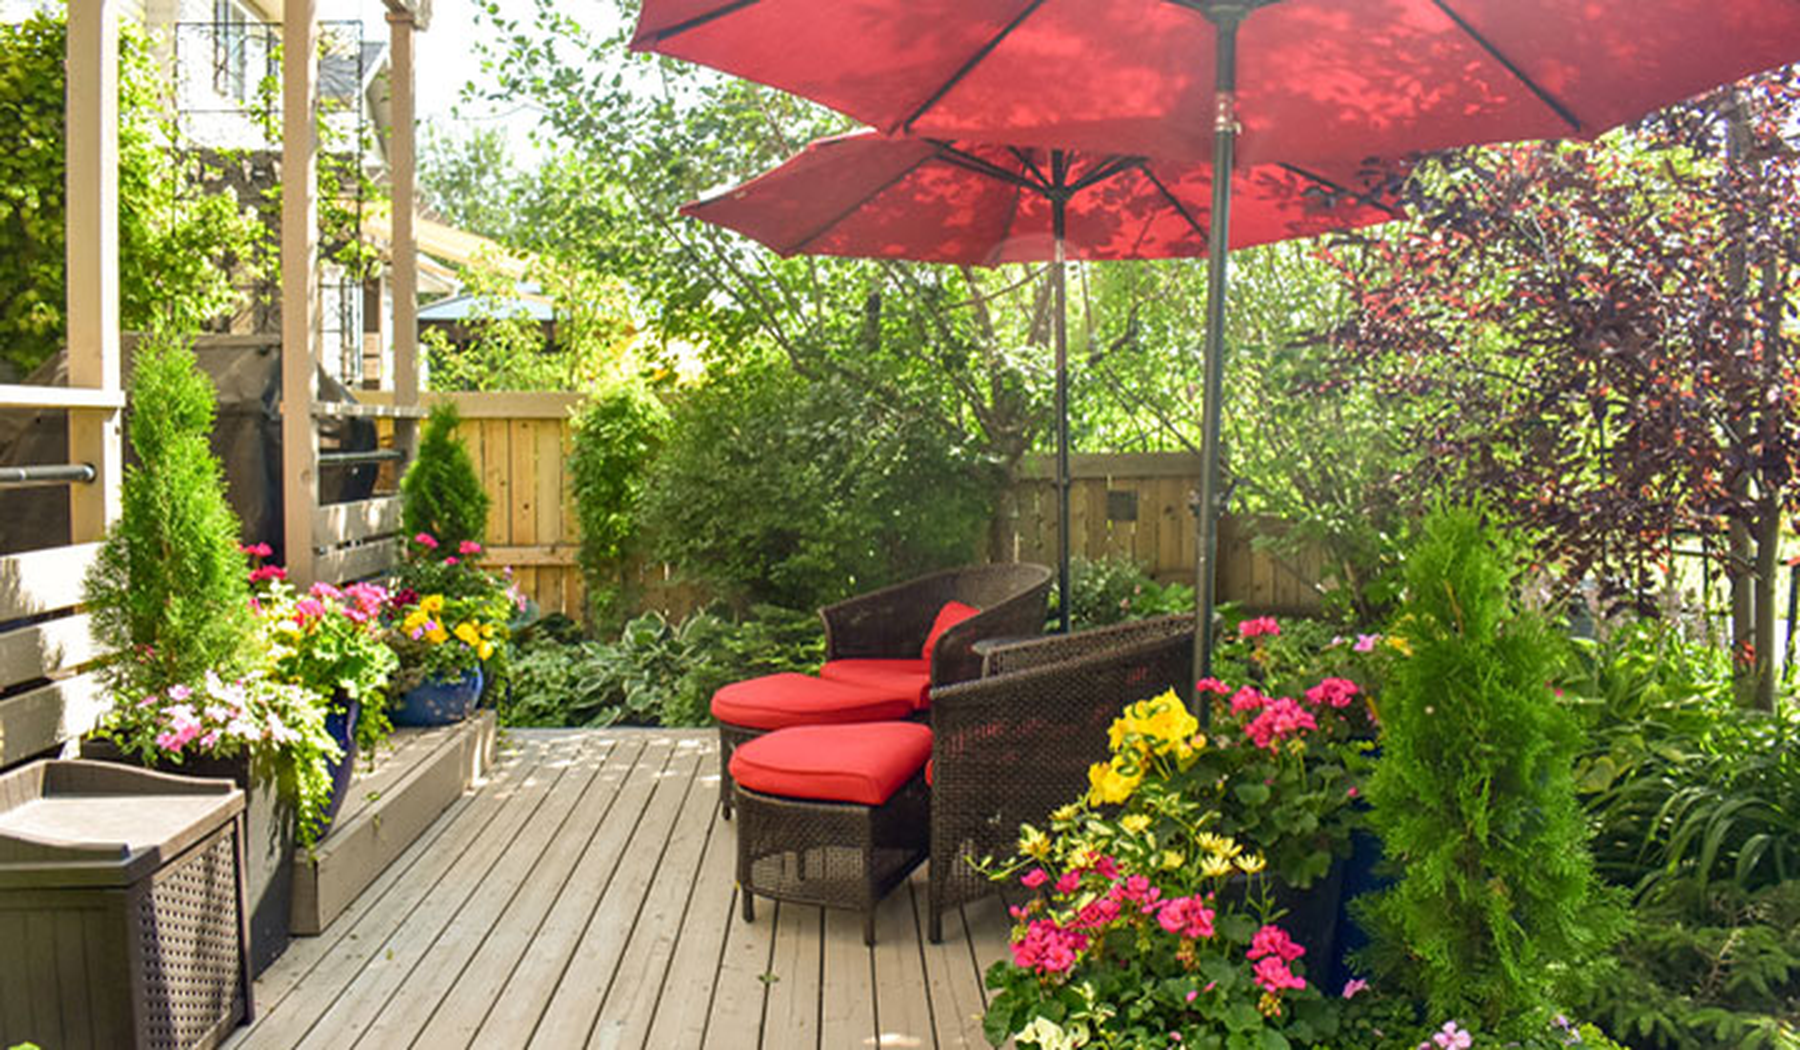 Patio set with red cushions and a red umbrella